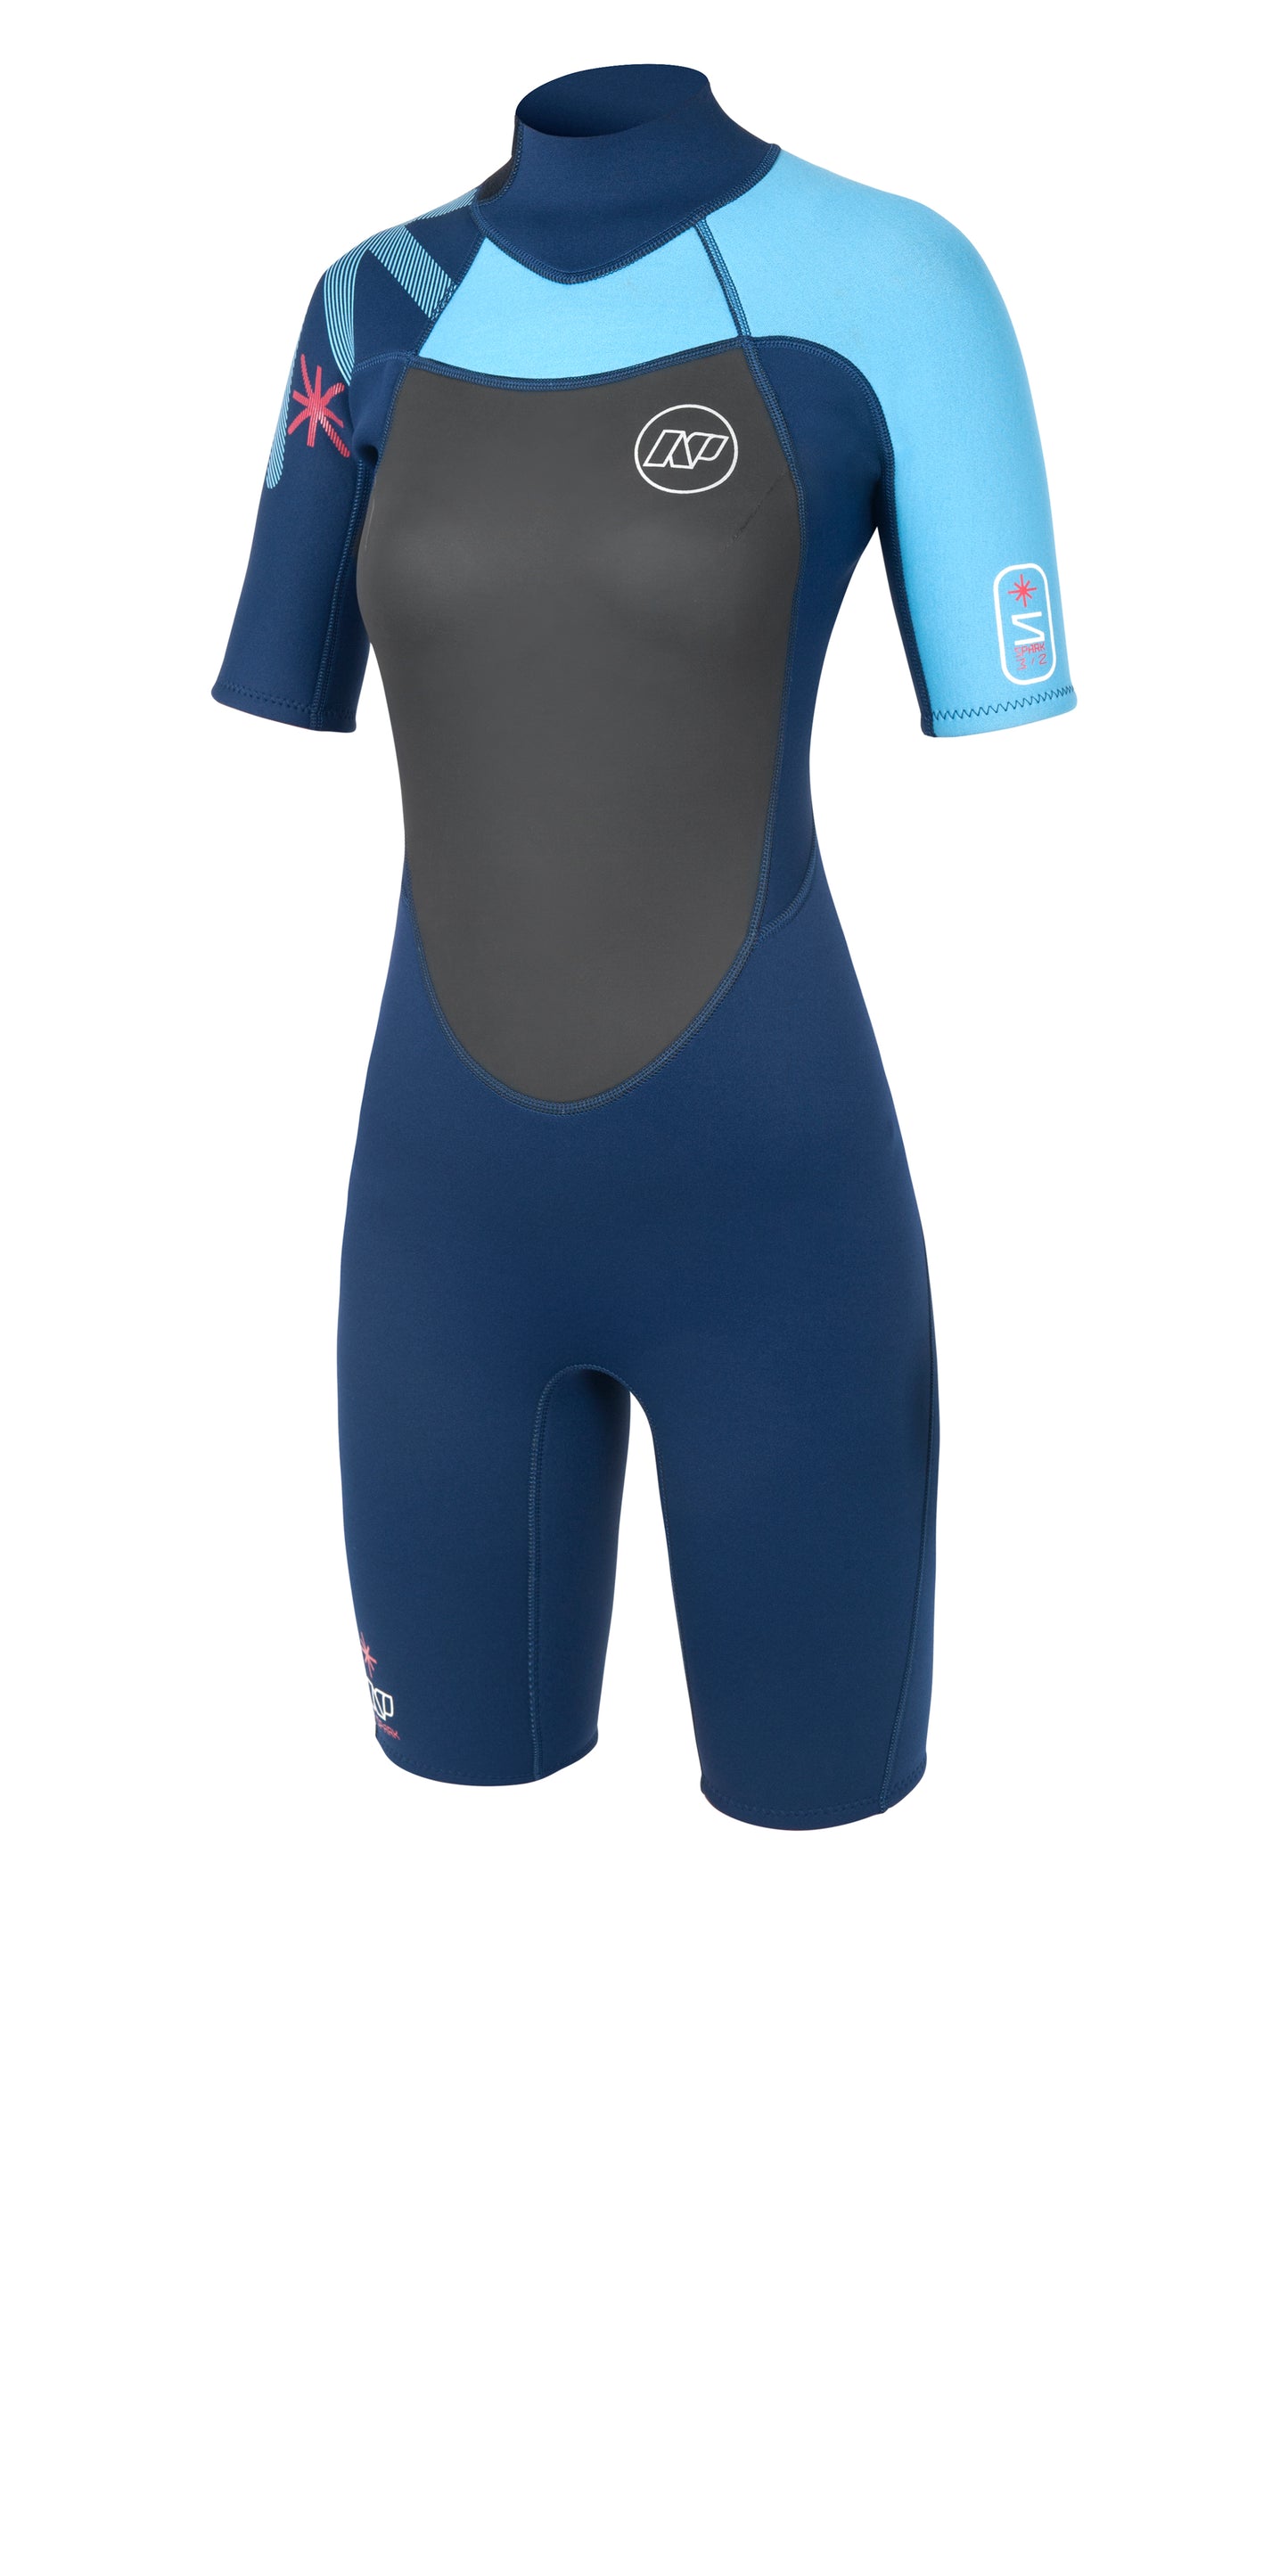 Neil Pryde Spark Womens Shorty 2-2 Wetsuit